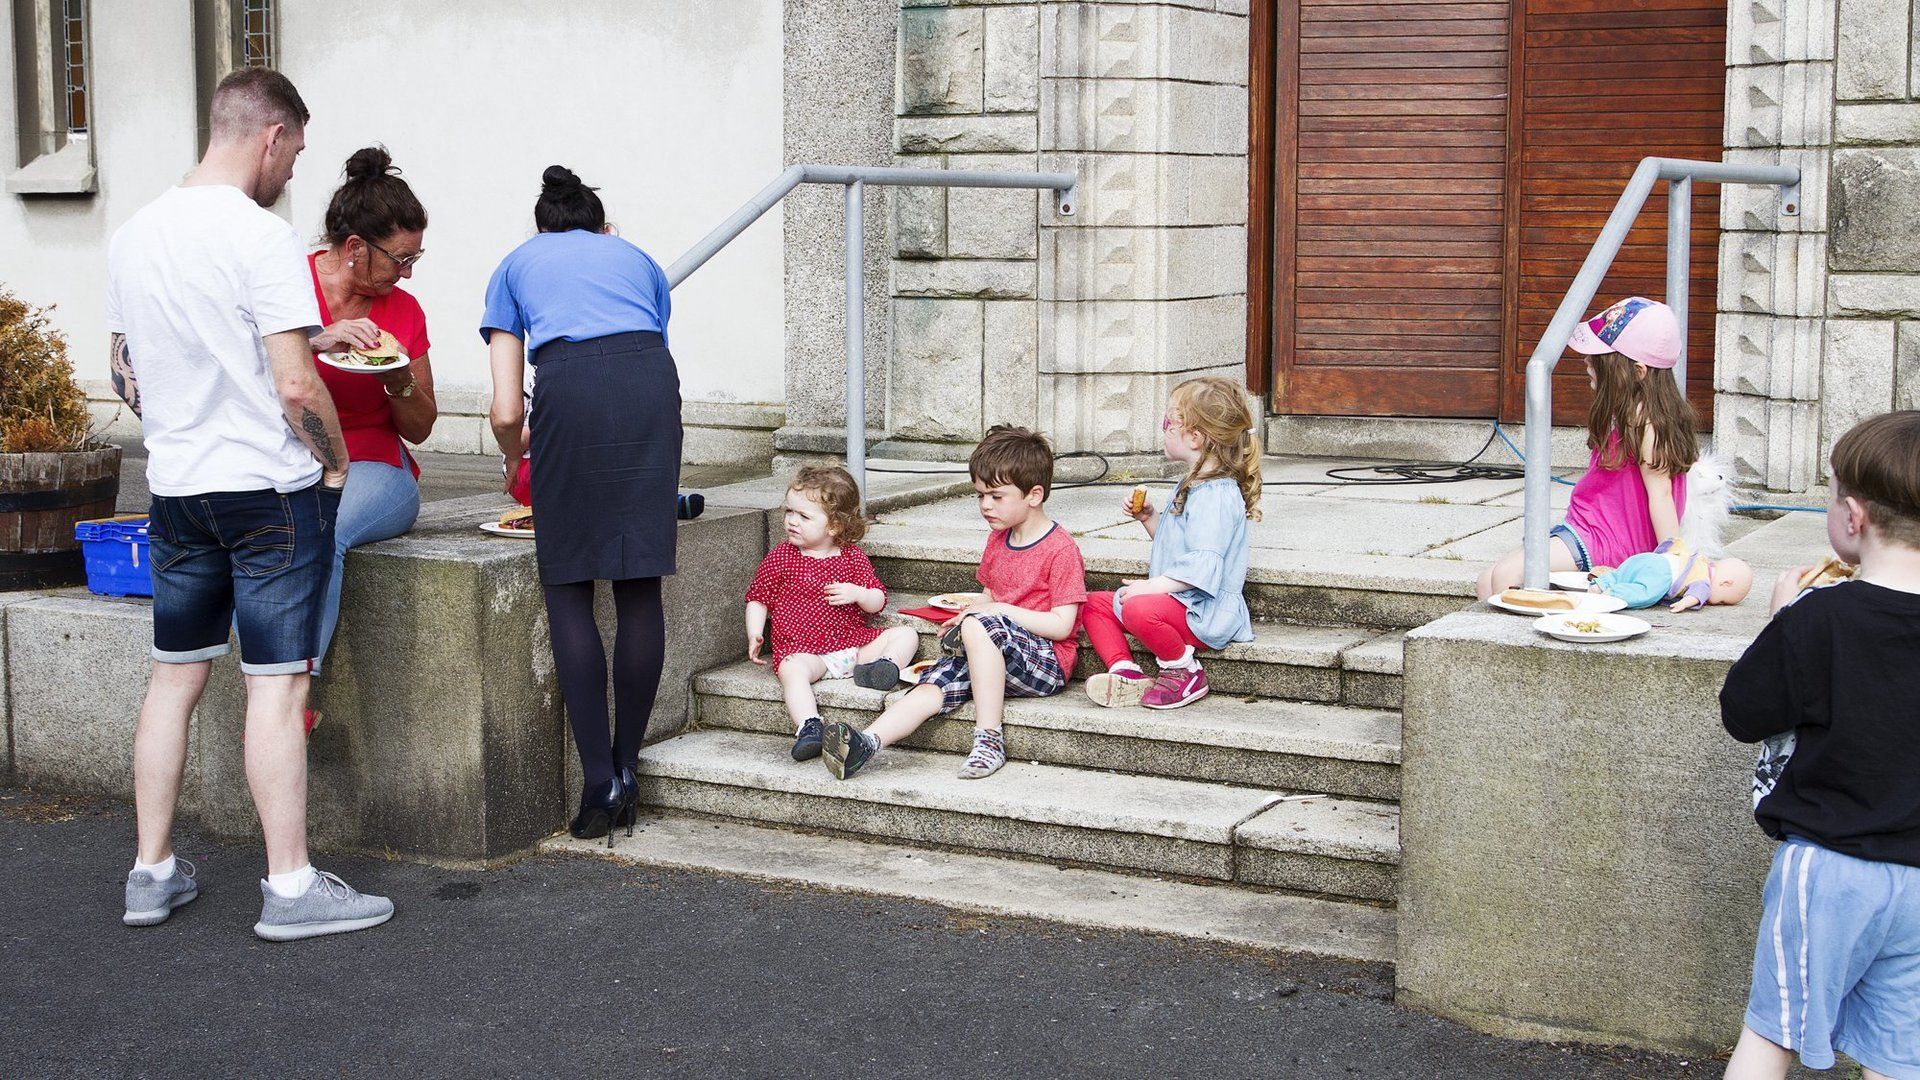 A group of children are sitting on the steps of a building.